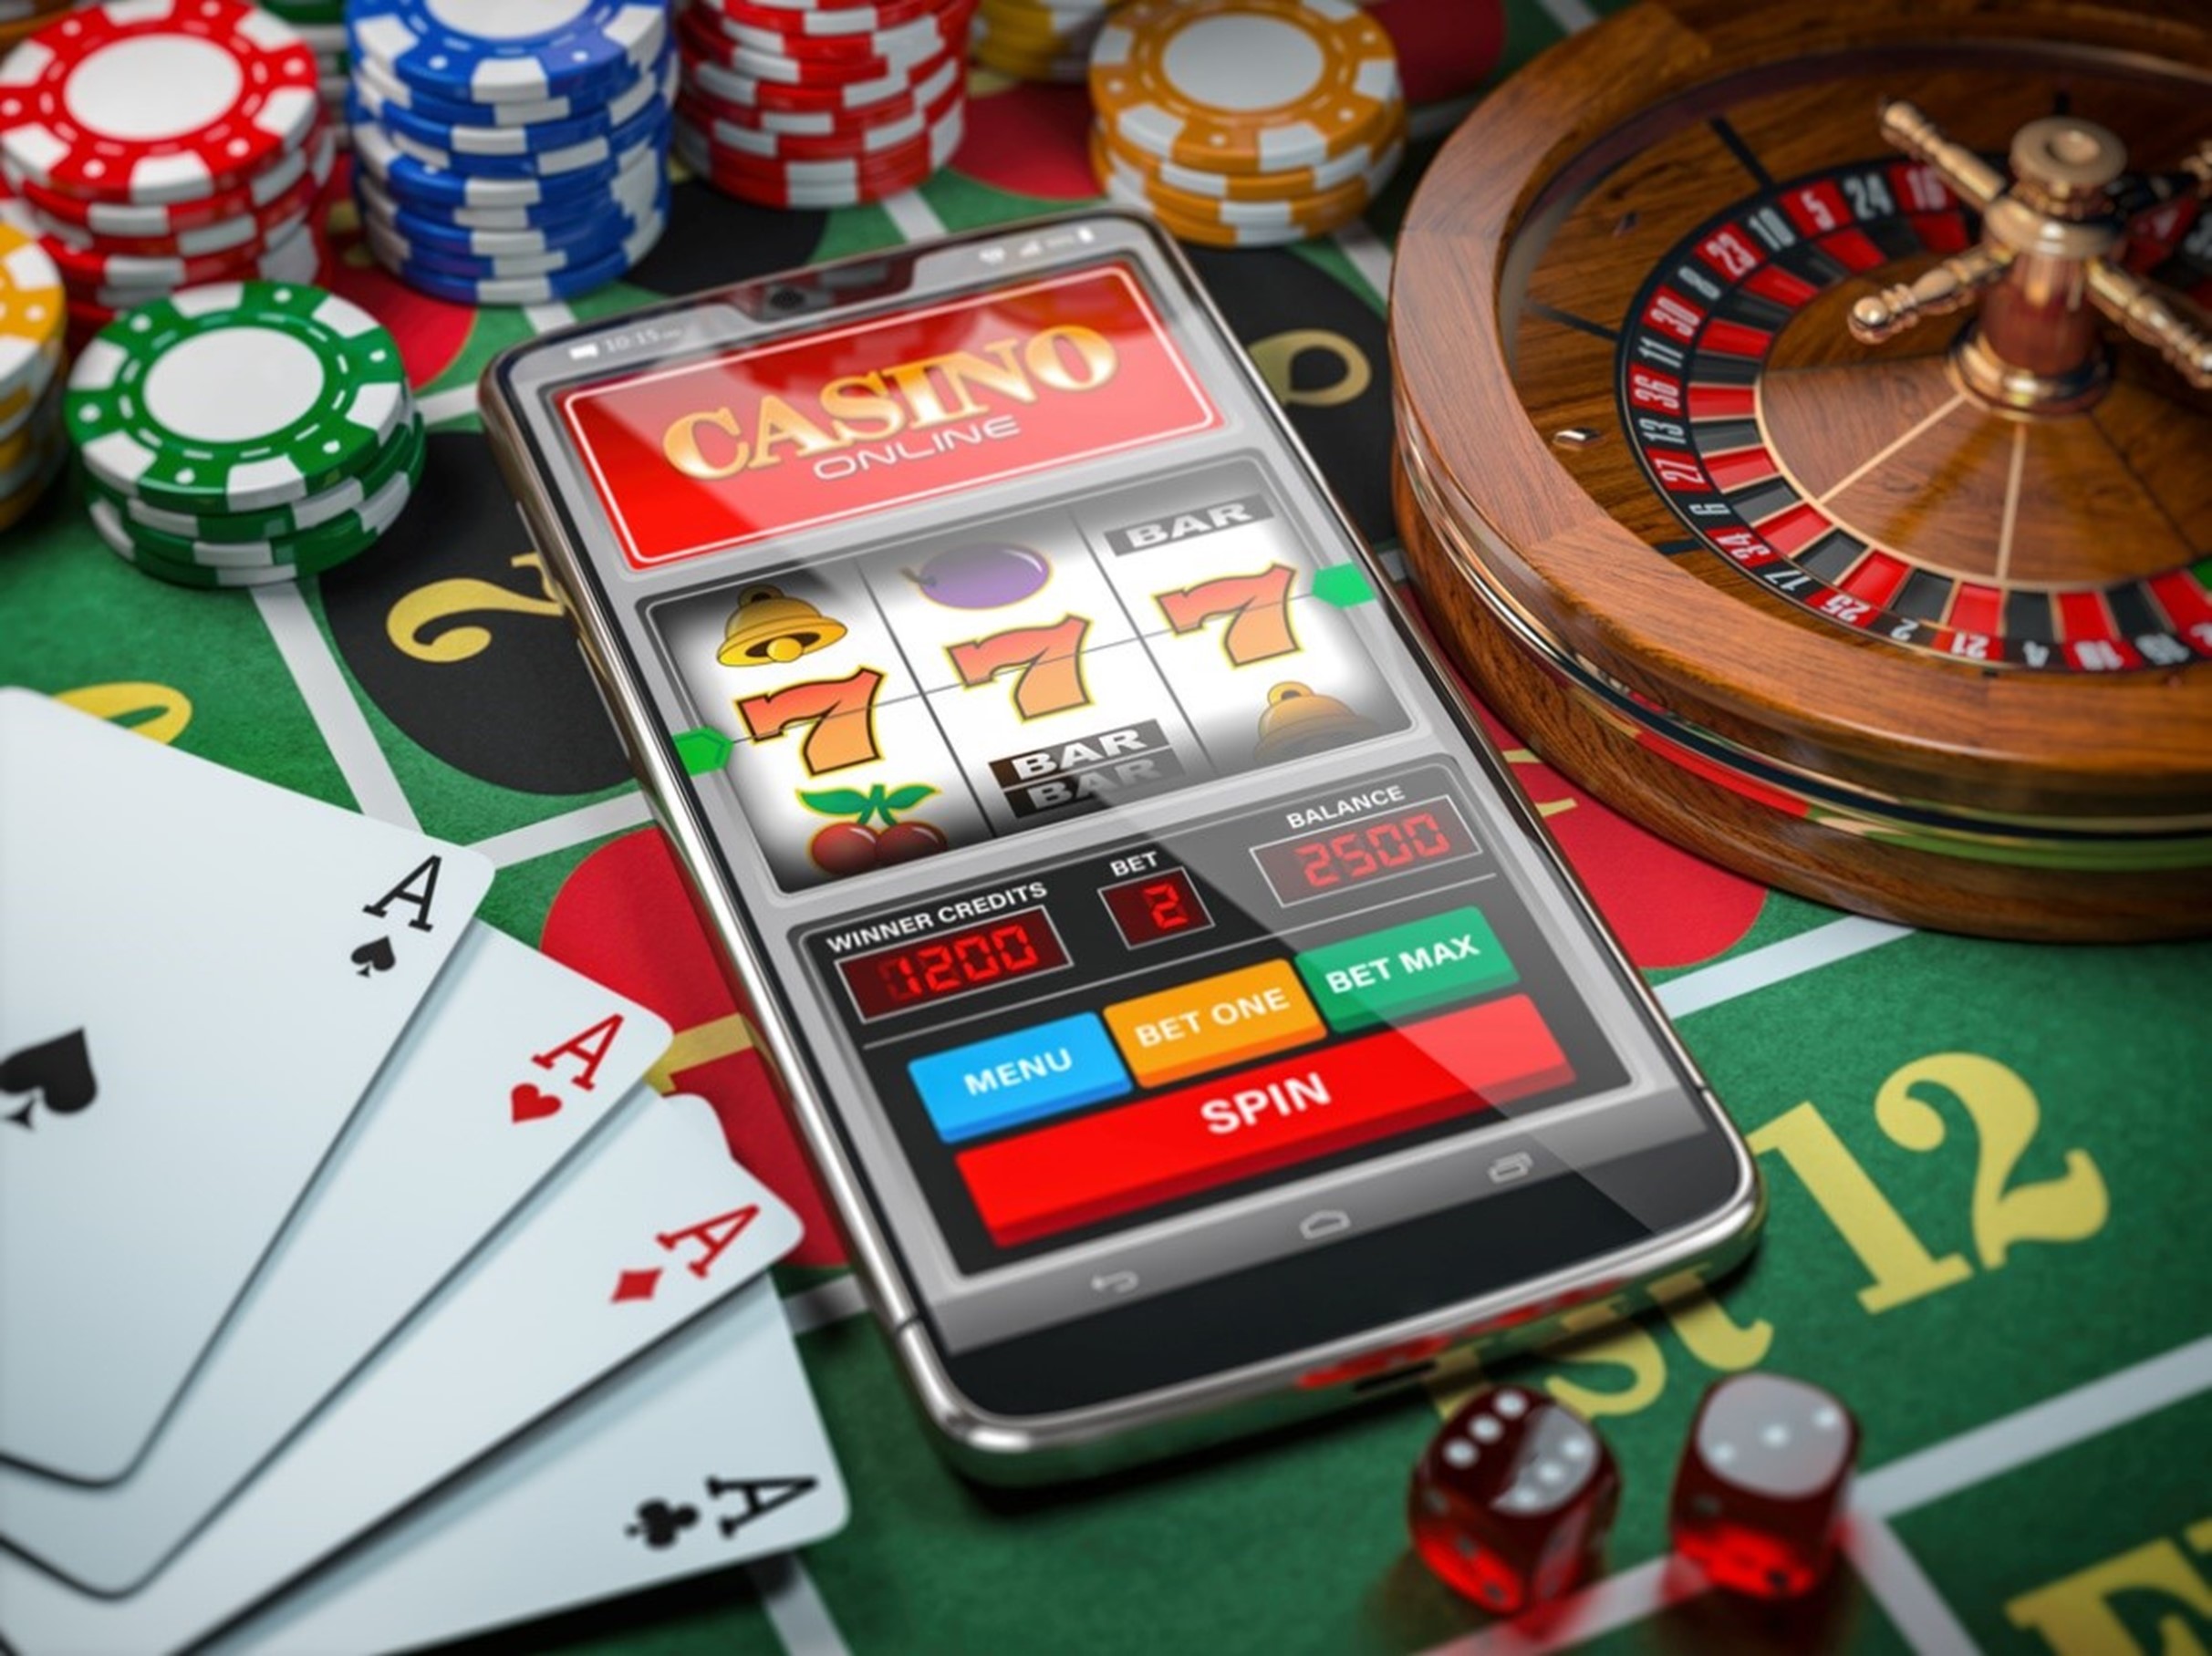 Top 5 Ways to Increase Your Chances of Winning in Online Casino Games